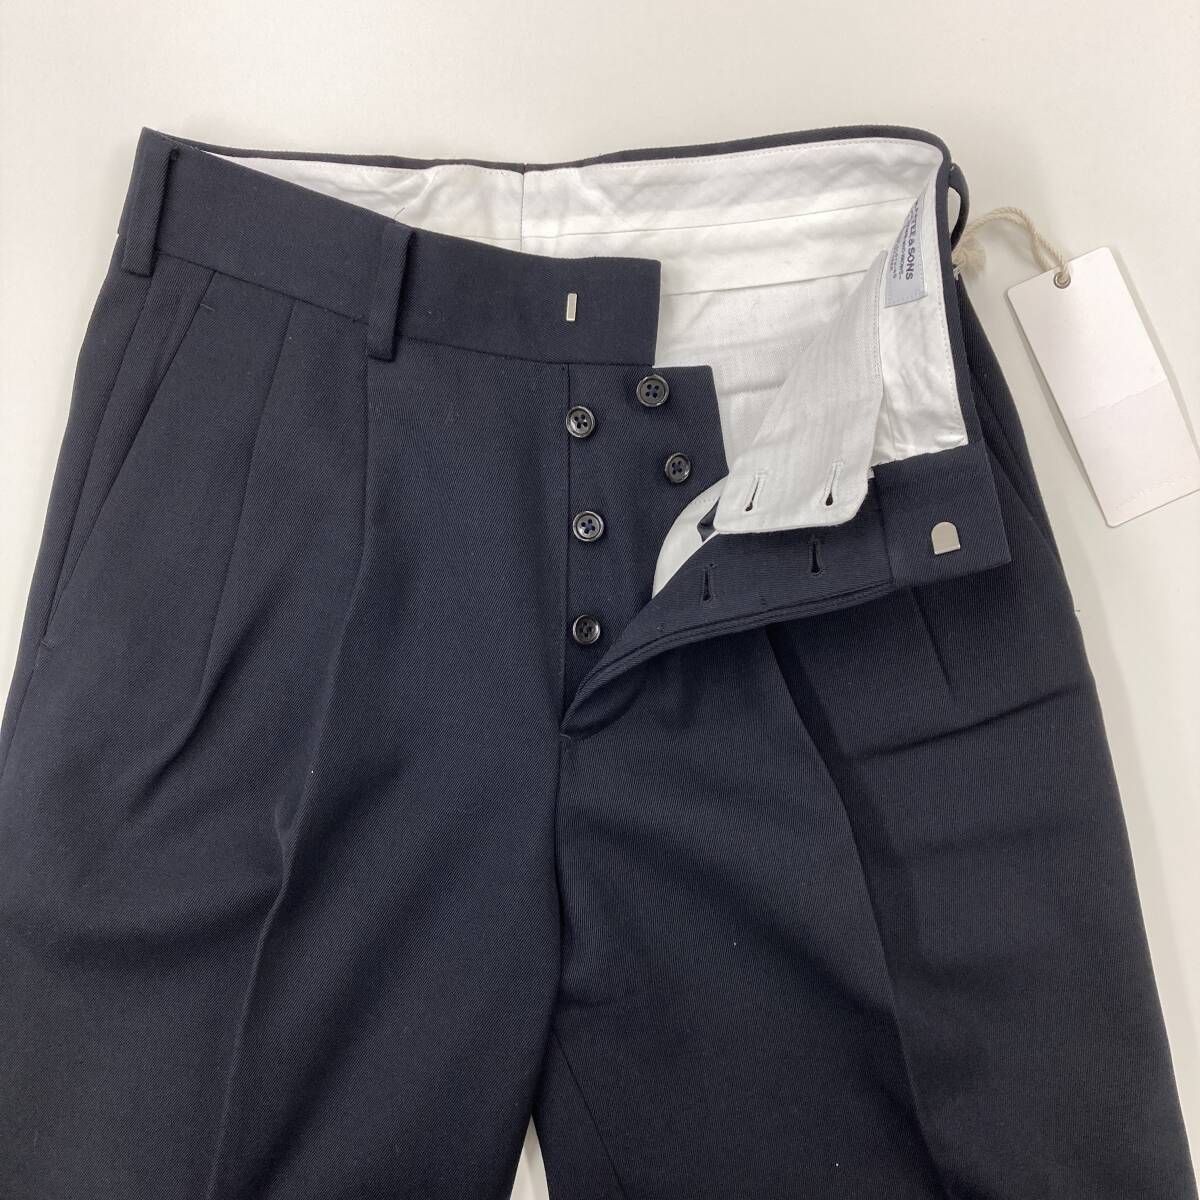 MAATEE&SONS 2TUCK TROUSERS Me. chinos Me. CHINO-PAN trousers pants black navy MT1303-0221Ama-ti& sun z4010383